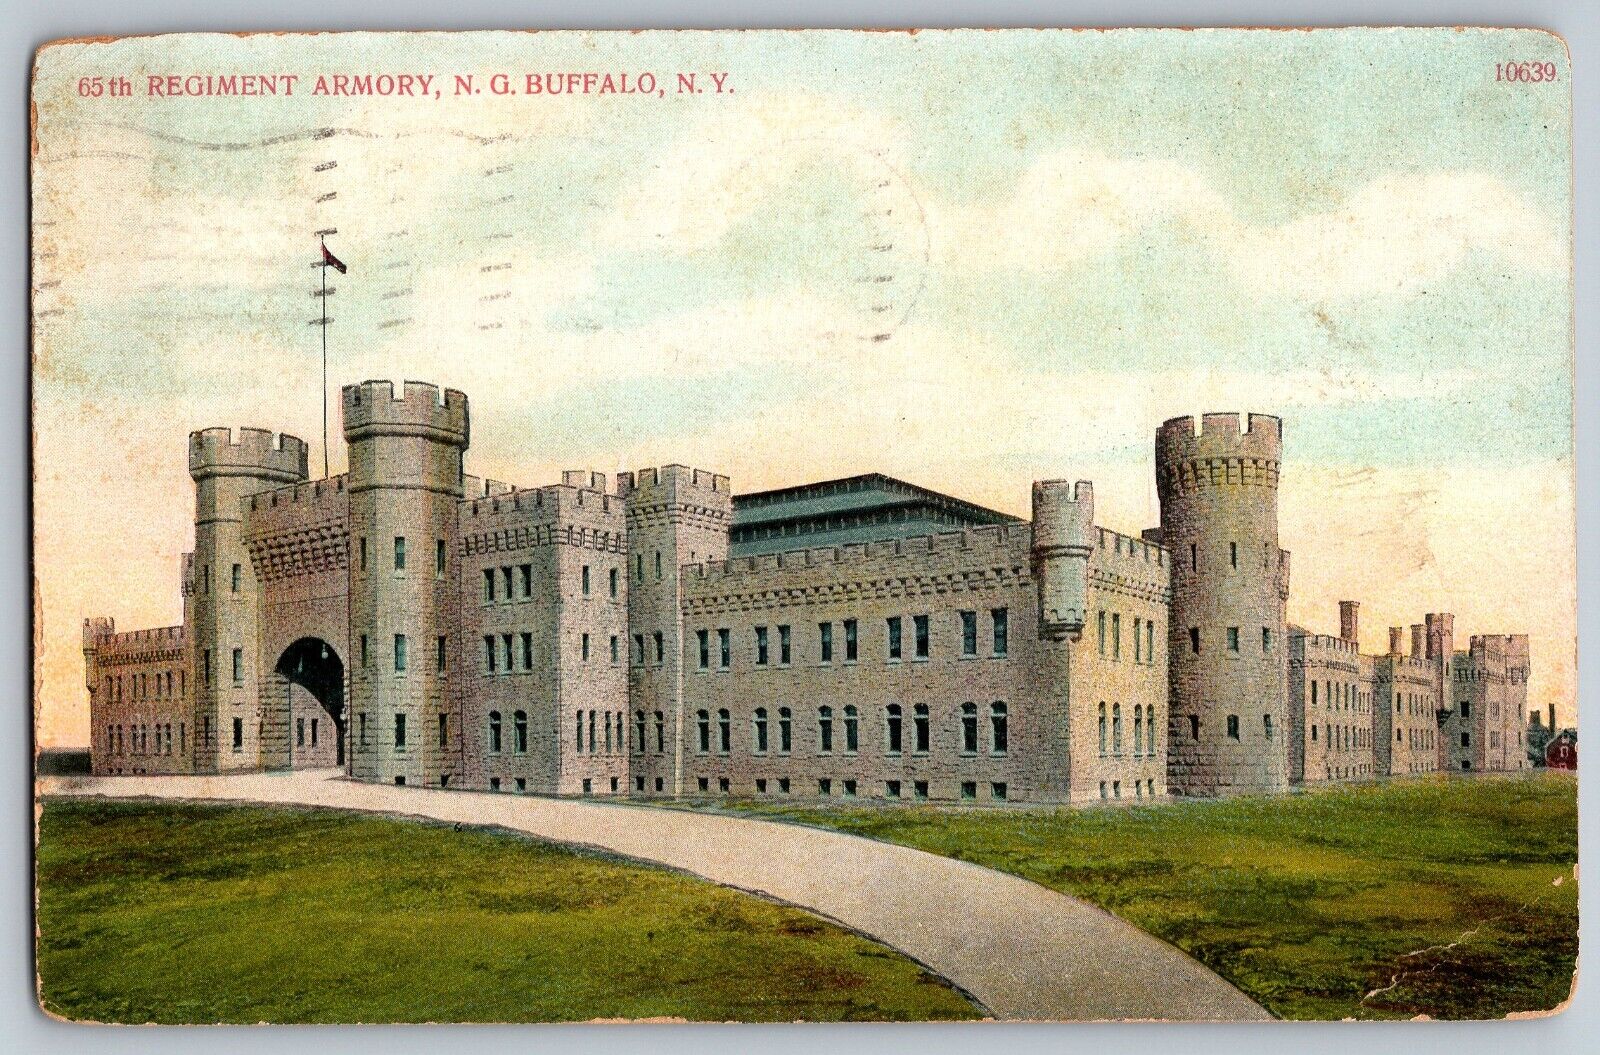 Buffalo, New York - 65th Regiment Armory - Vintage Postcard - Posted 1909